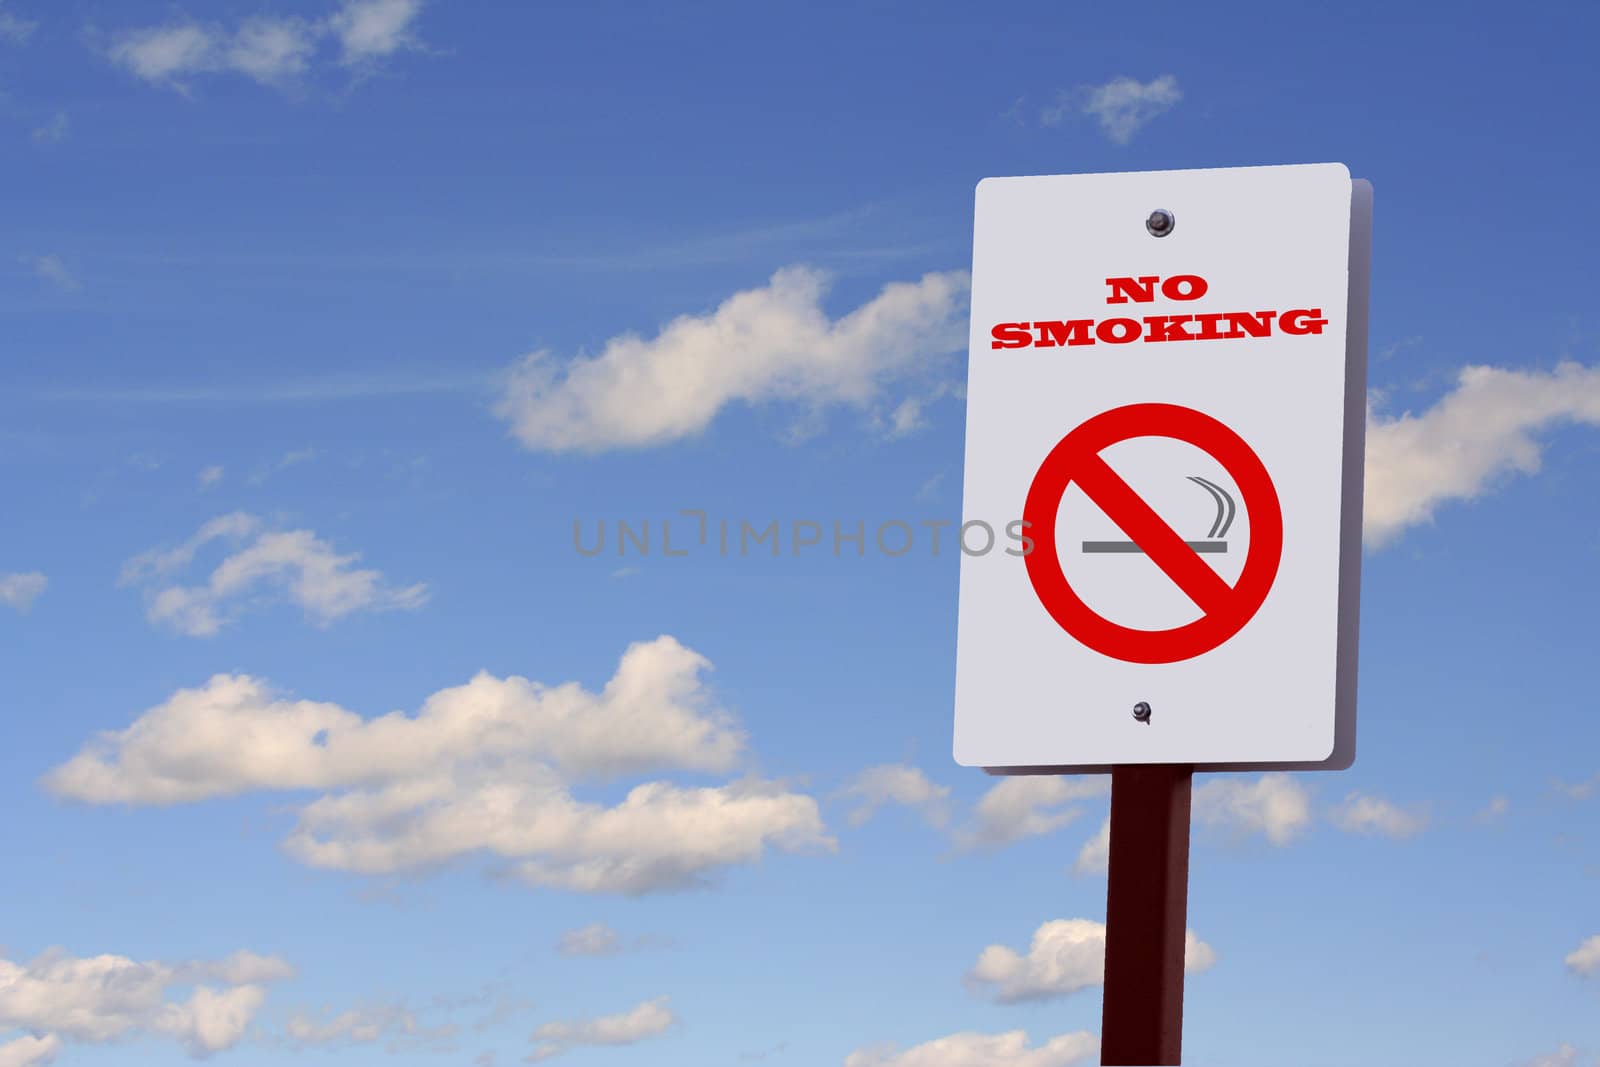 No smoking sign on a post against a blue sky with puffy white clouds